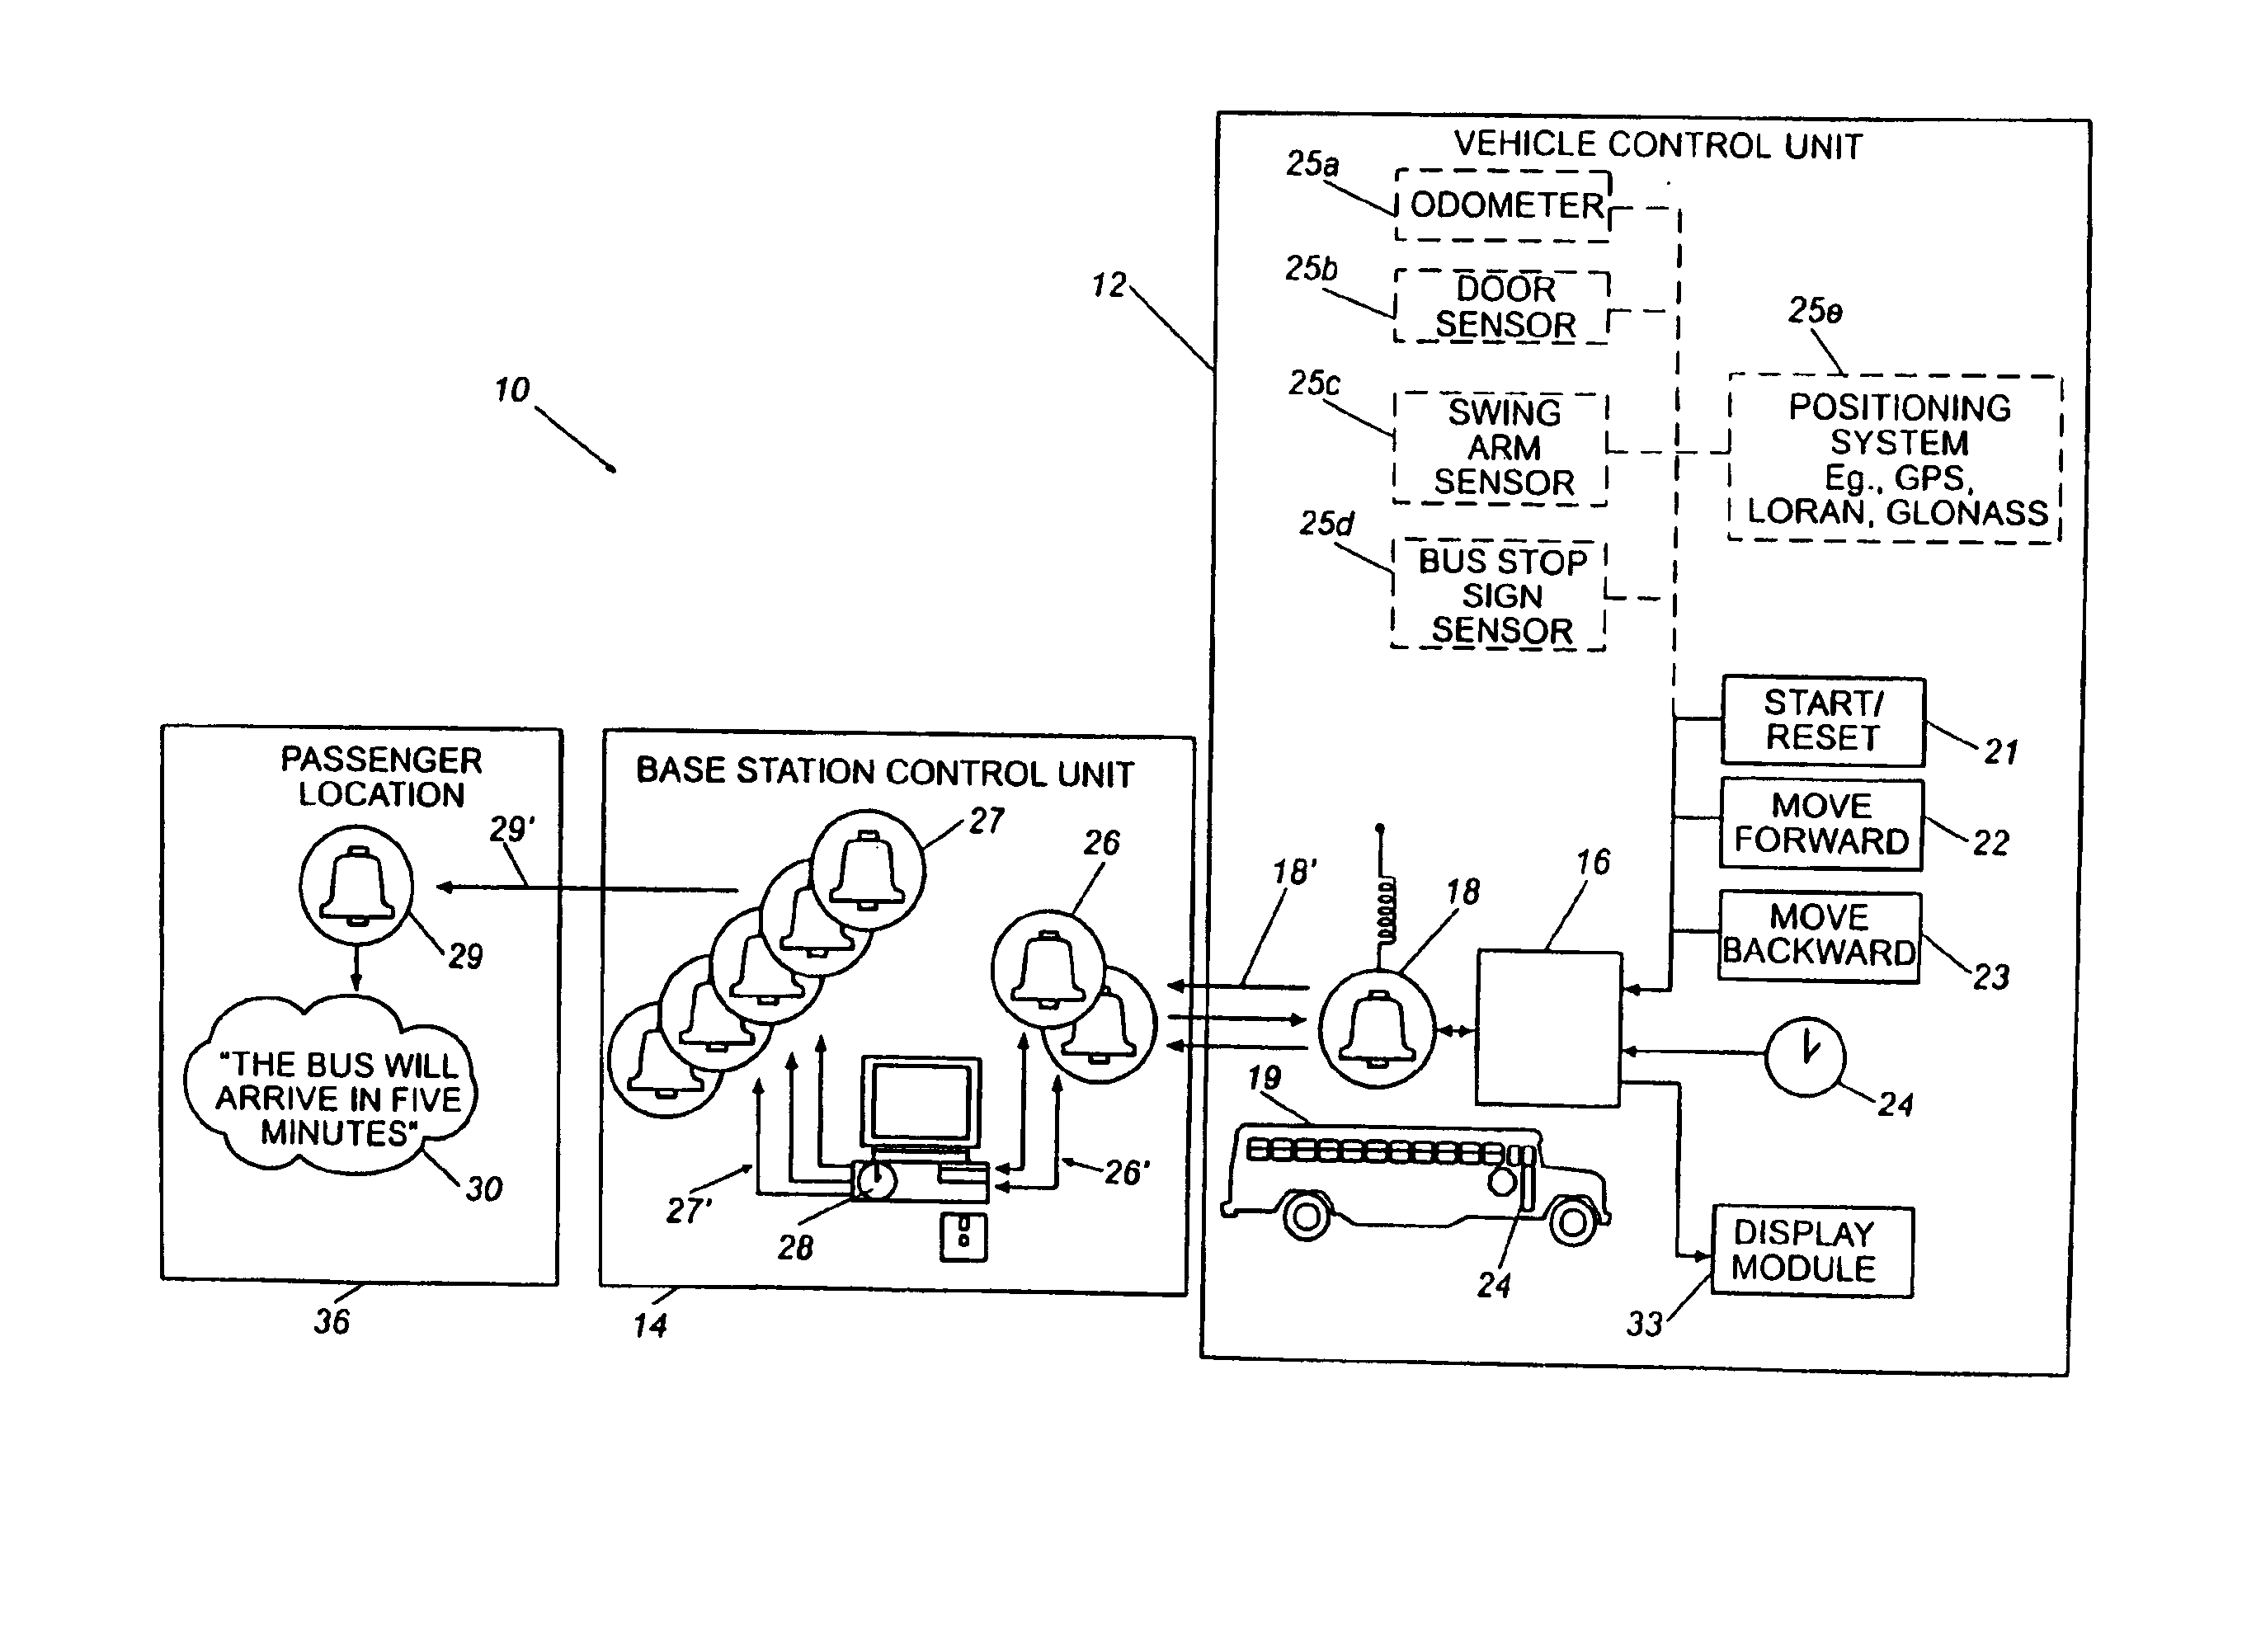 Notification system and method that informs a party of vehicle delay